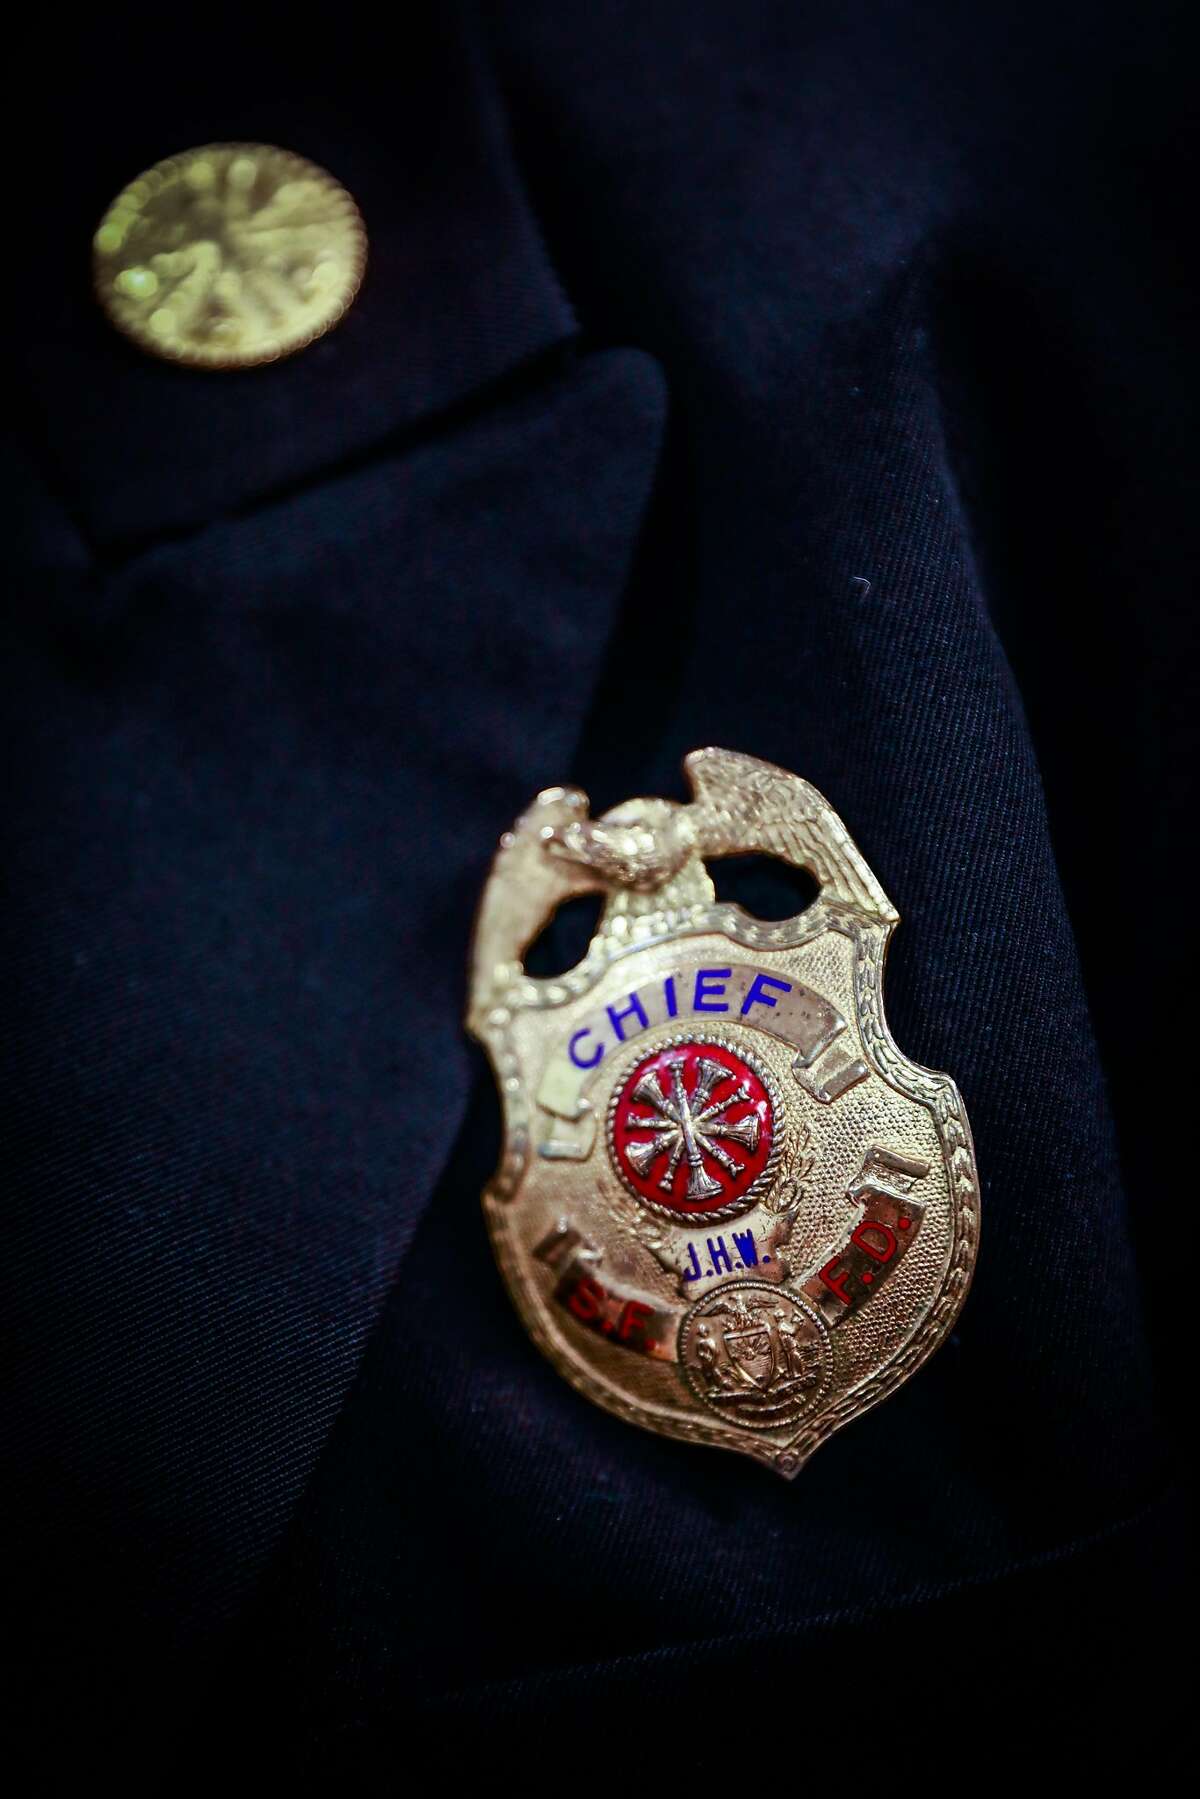 San Francisco Fire Chief Joanne Hayes-White's Chief badge is seen on her as she chats in her office in San Francisco, California, on Monday, Oct. 22, 2018.